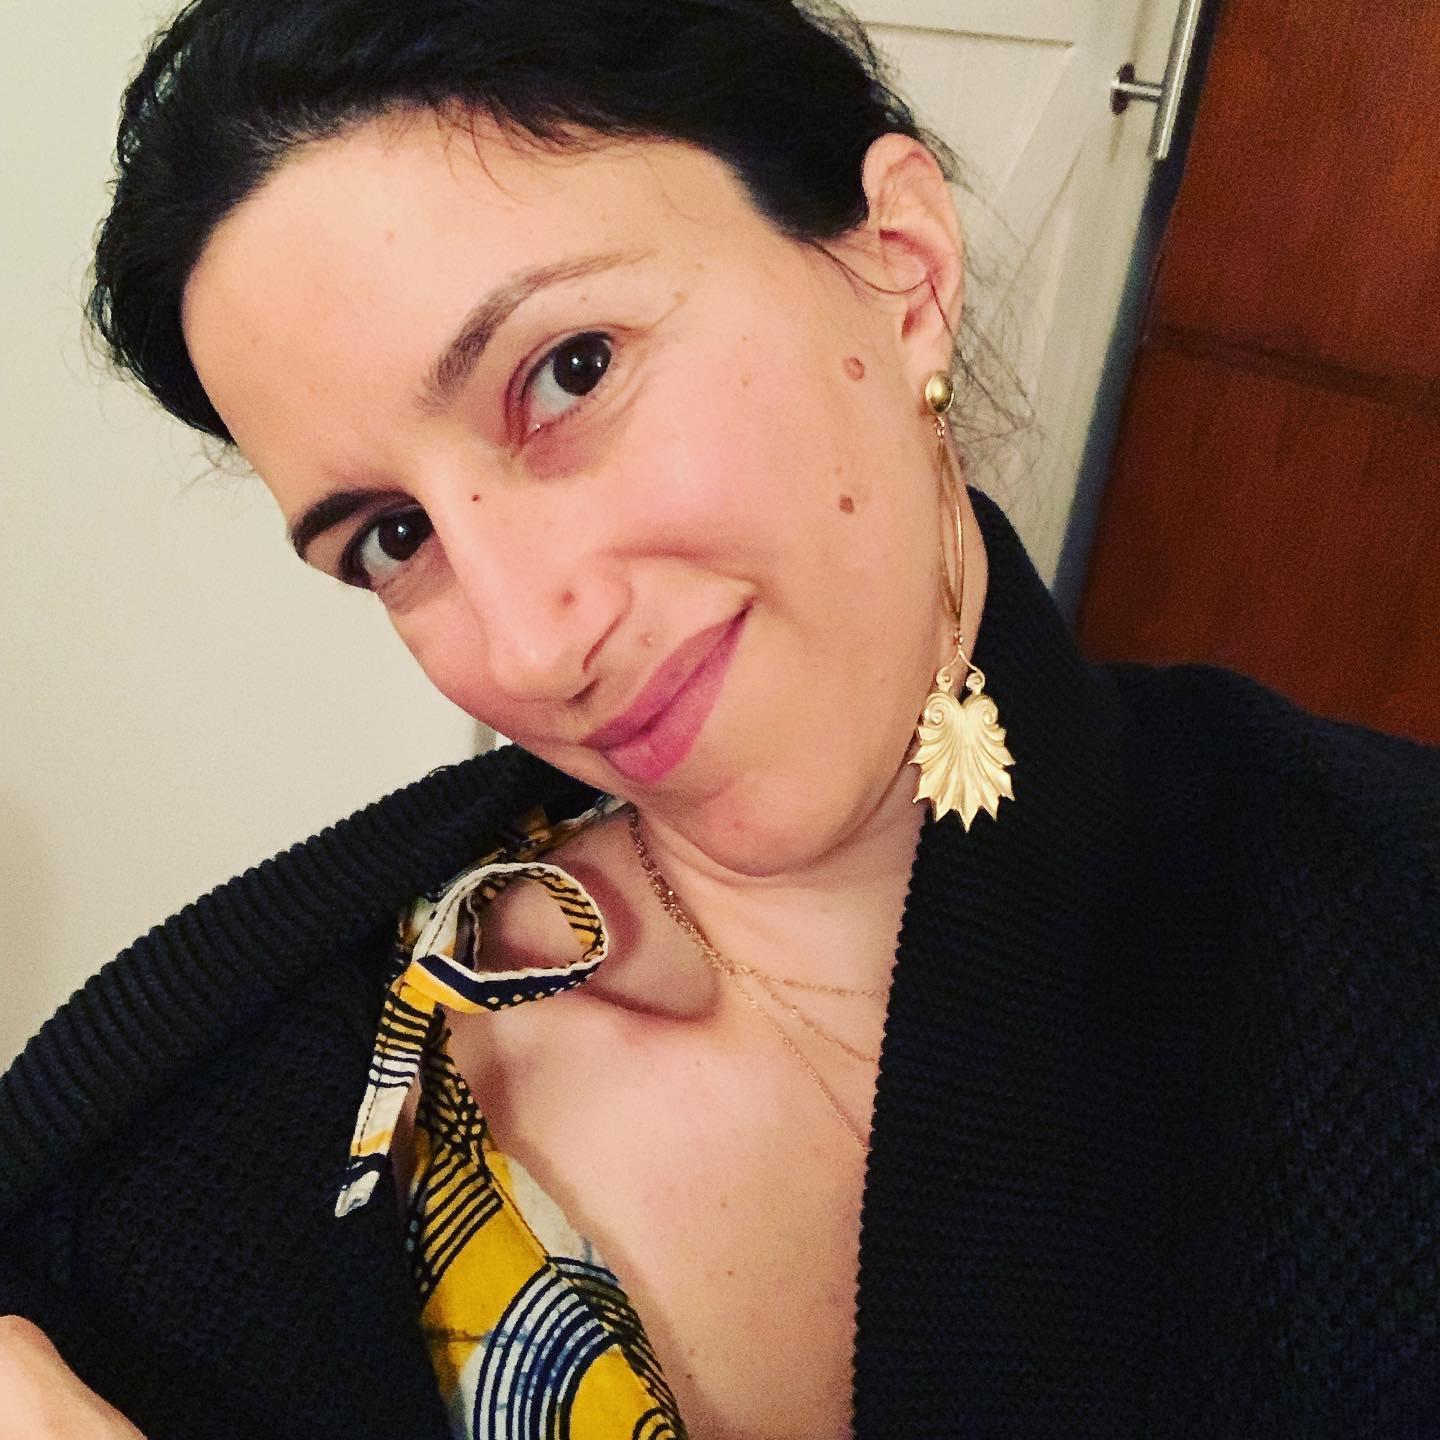 Akrokeramo Classical Greek style earrings designed by Alexandra Koumba are in our Timeless collection of jewelry pieces that are ancient inspired.

They come in a semi mat finish; hand hammered in the ancient greek technique.
The price quoted here